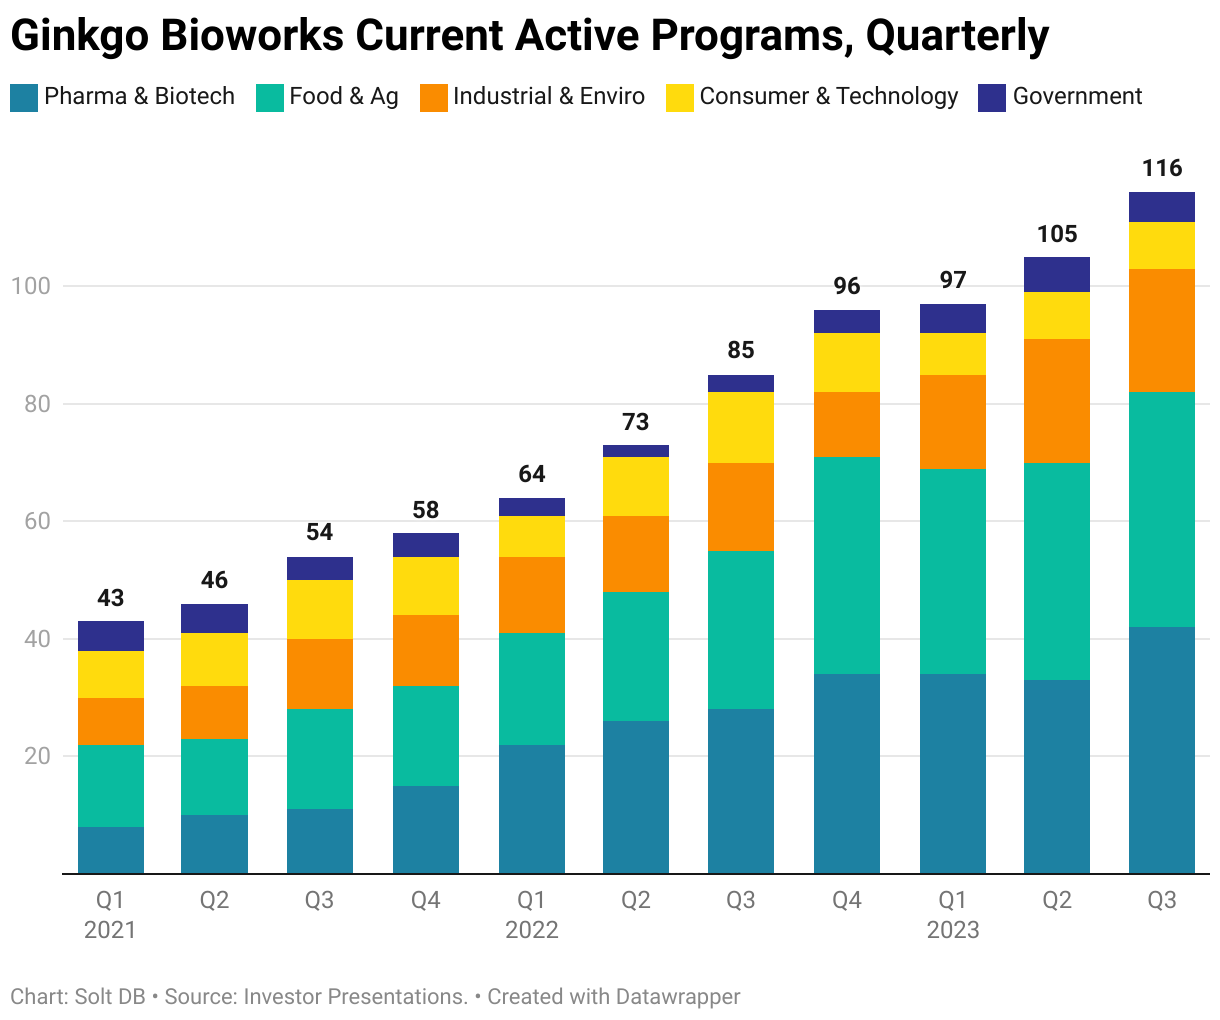 A stacked bar chart showing current active programs at Ginkgo Bioworks from the first quarter of 2021 to the third quarter of 2023.